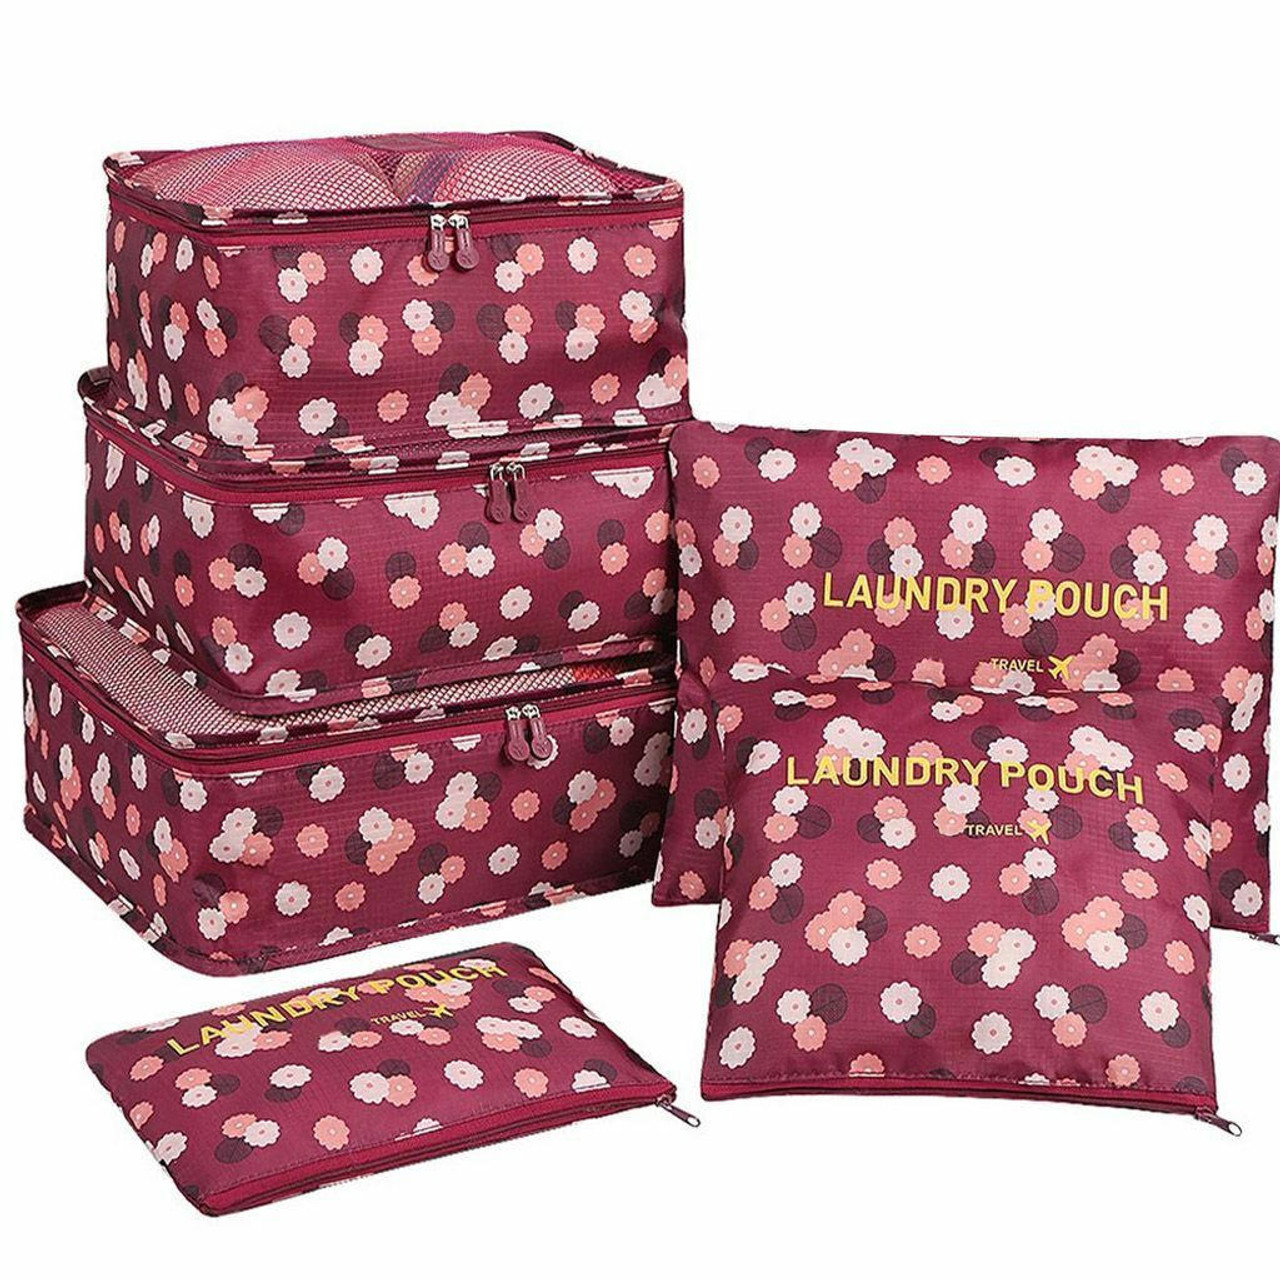 https://cdn11.bigcommerce.com/s-zrh8tkpr8d/images/stencil/1280x1280/products/9963/34016/6pcsset-travel-storage-bag-for-clothes-luggage-packing-cube-organizer-suitcase__17708.1702314515.jpg?c=2&imbypass=on